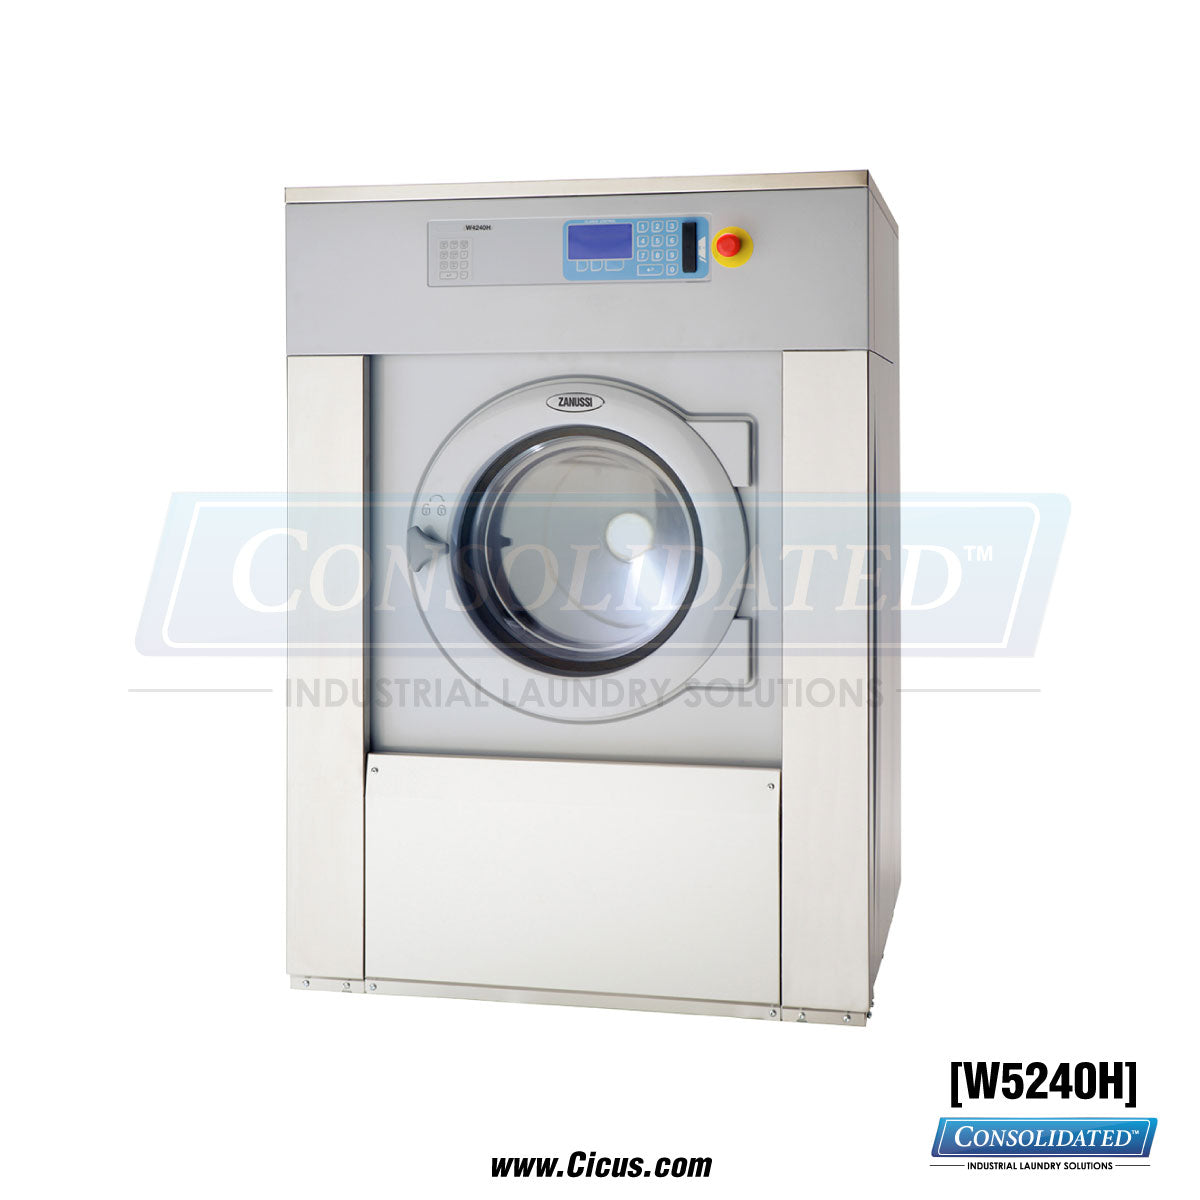 Electrolux G-Force Soft-Mount 60 LB Washer [W5240H]